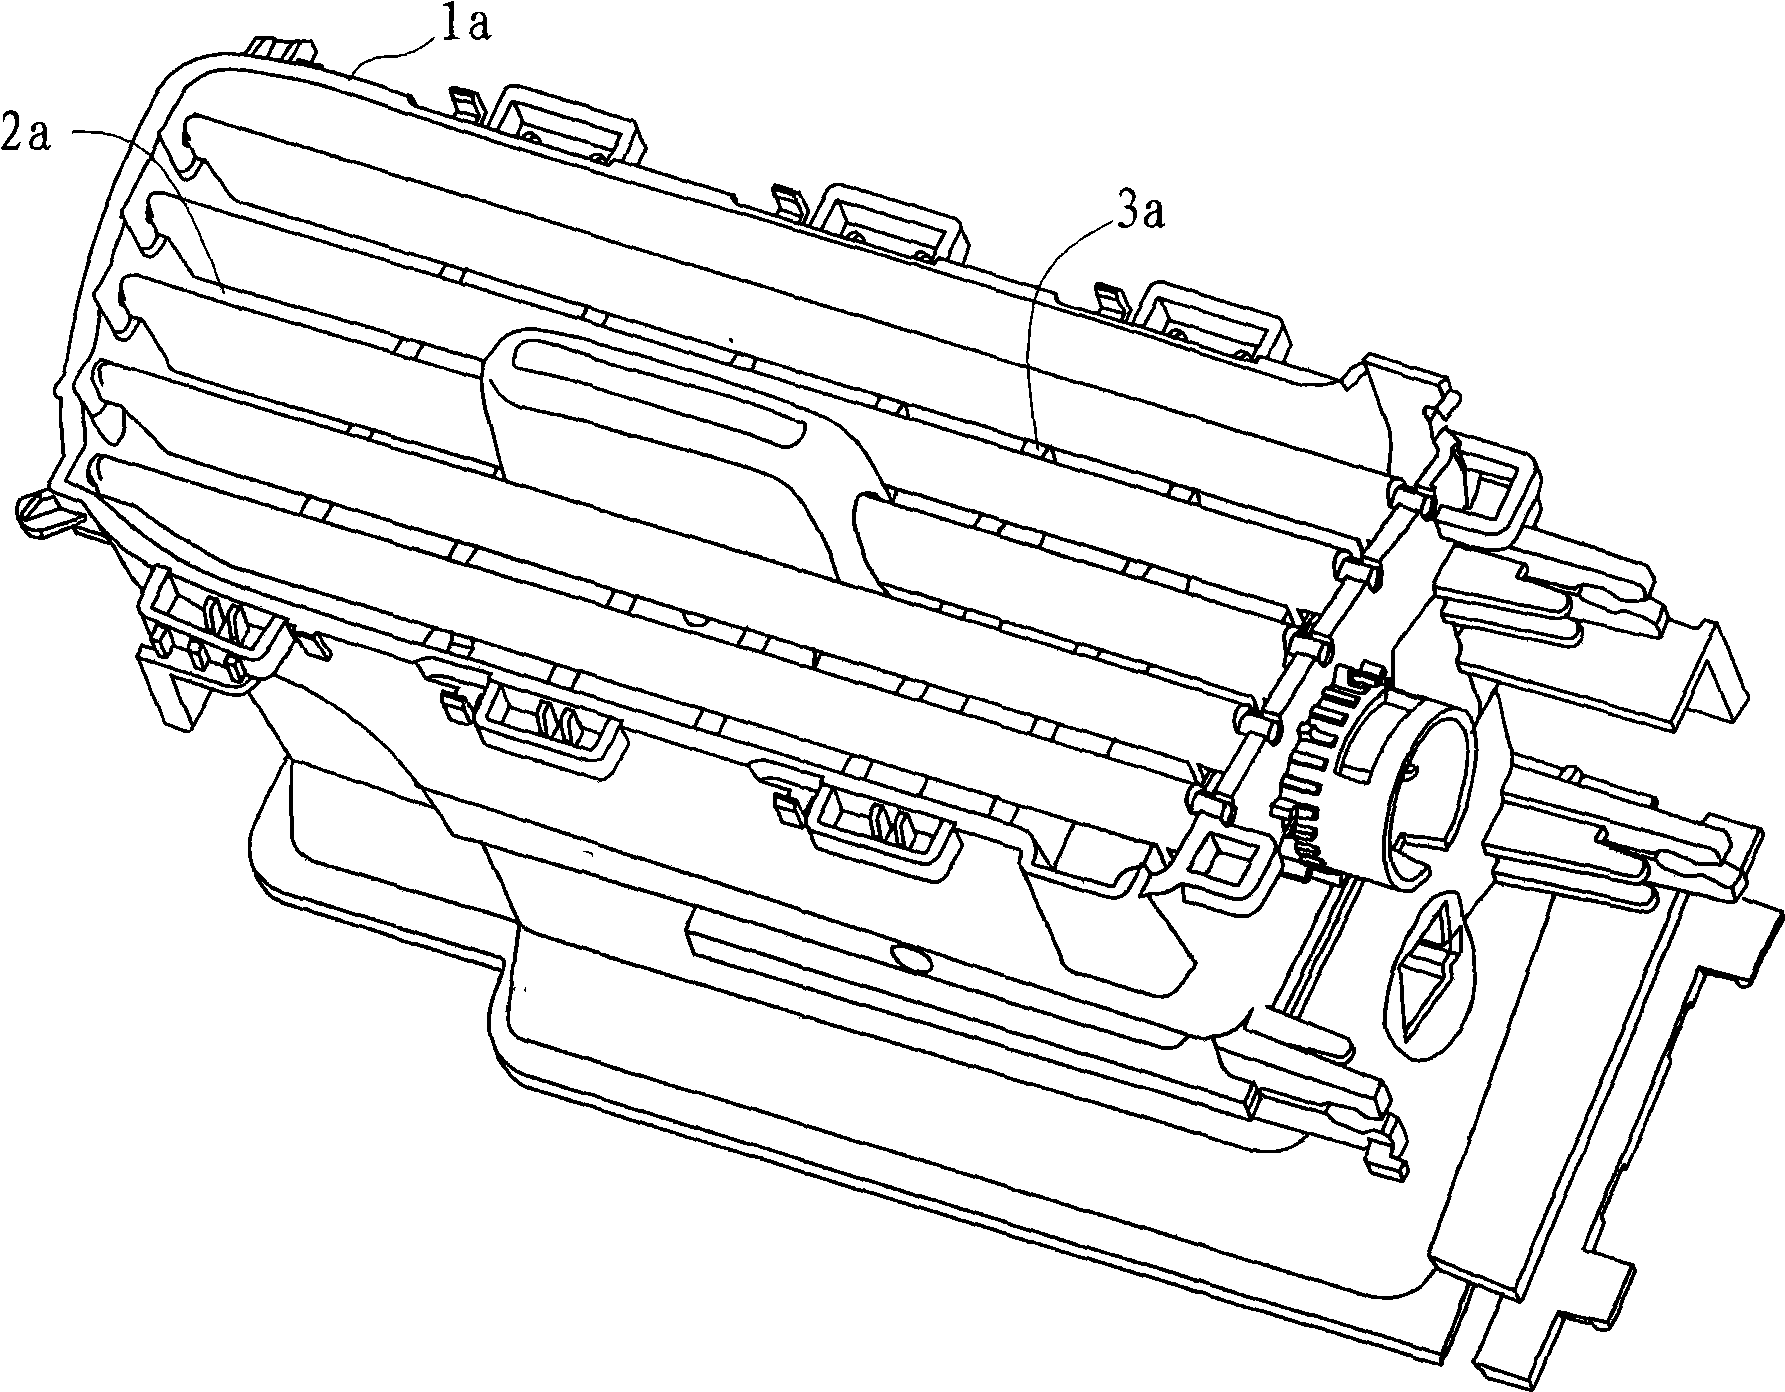 Device for combining and assembling air conditioner discharge set